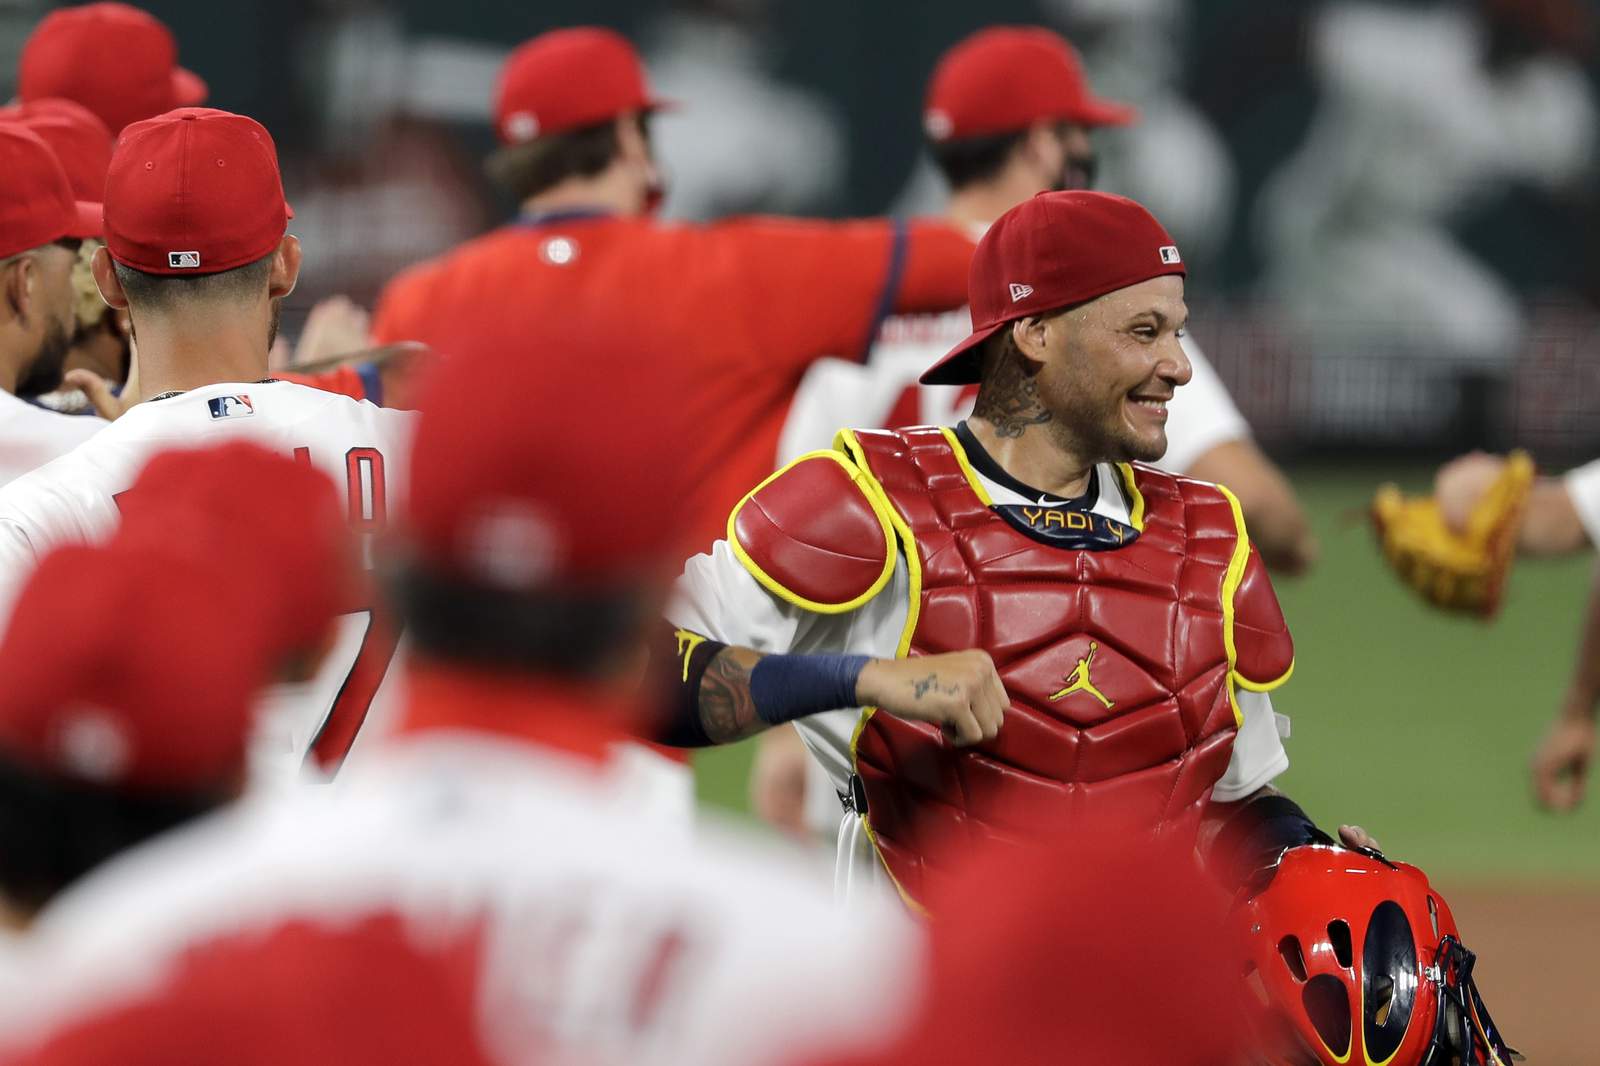 LEADING OFF: Cardinals emerge from long layoff in Chicago